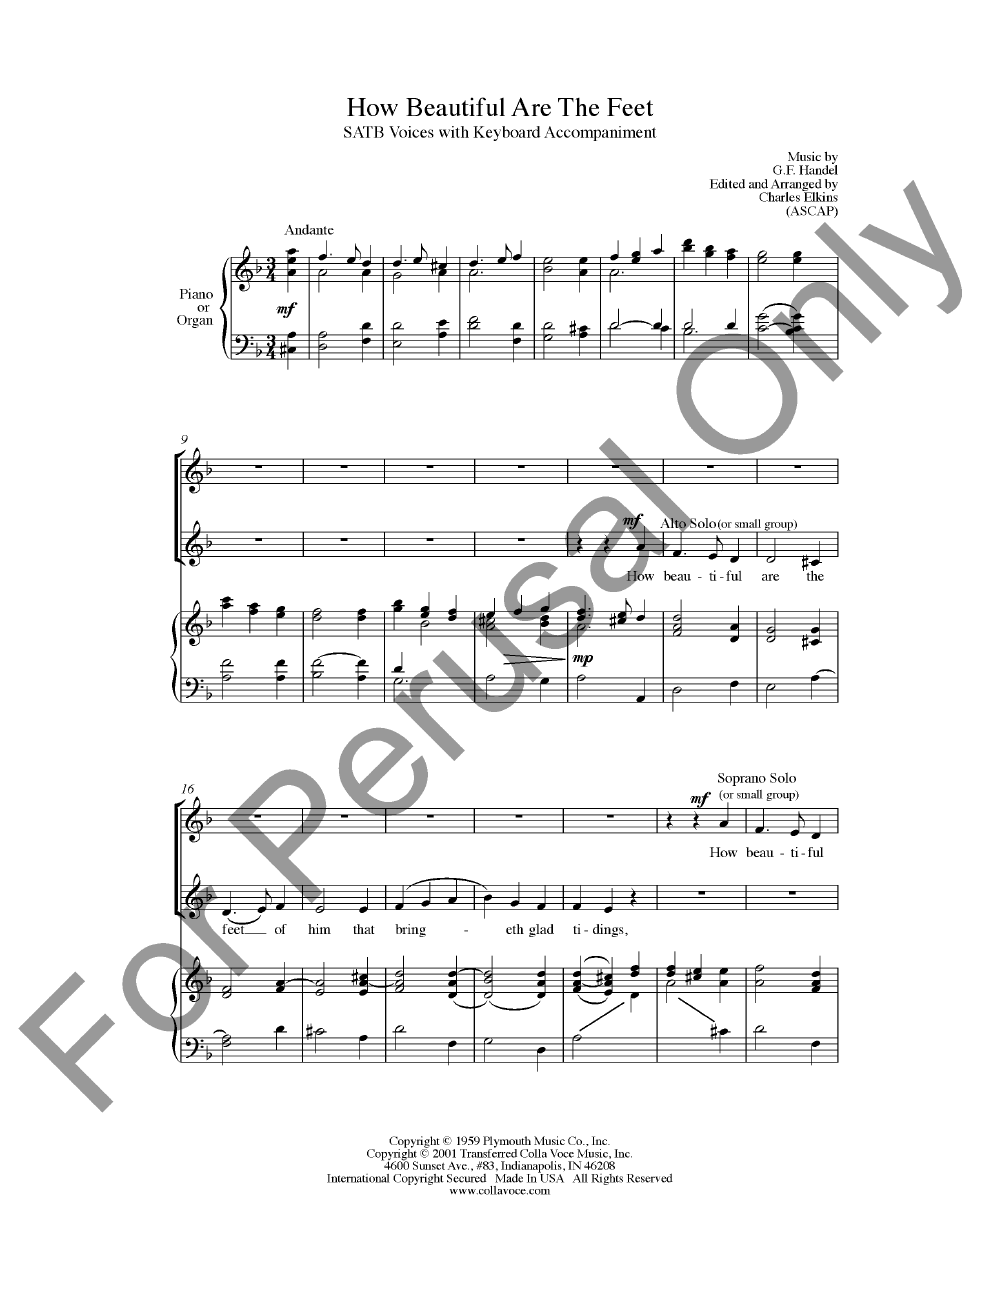 How Beautiful Are the Feet (SATB ) by HANDEL | J.W. Pepper Sheet Music